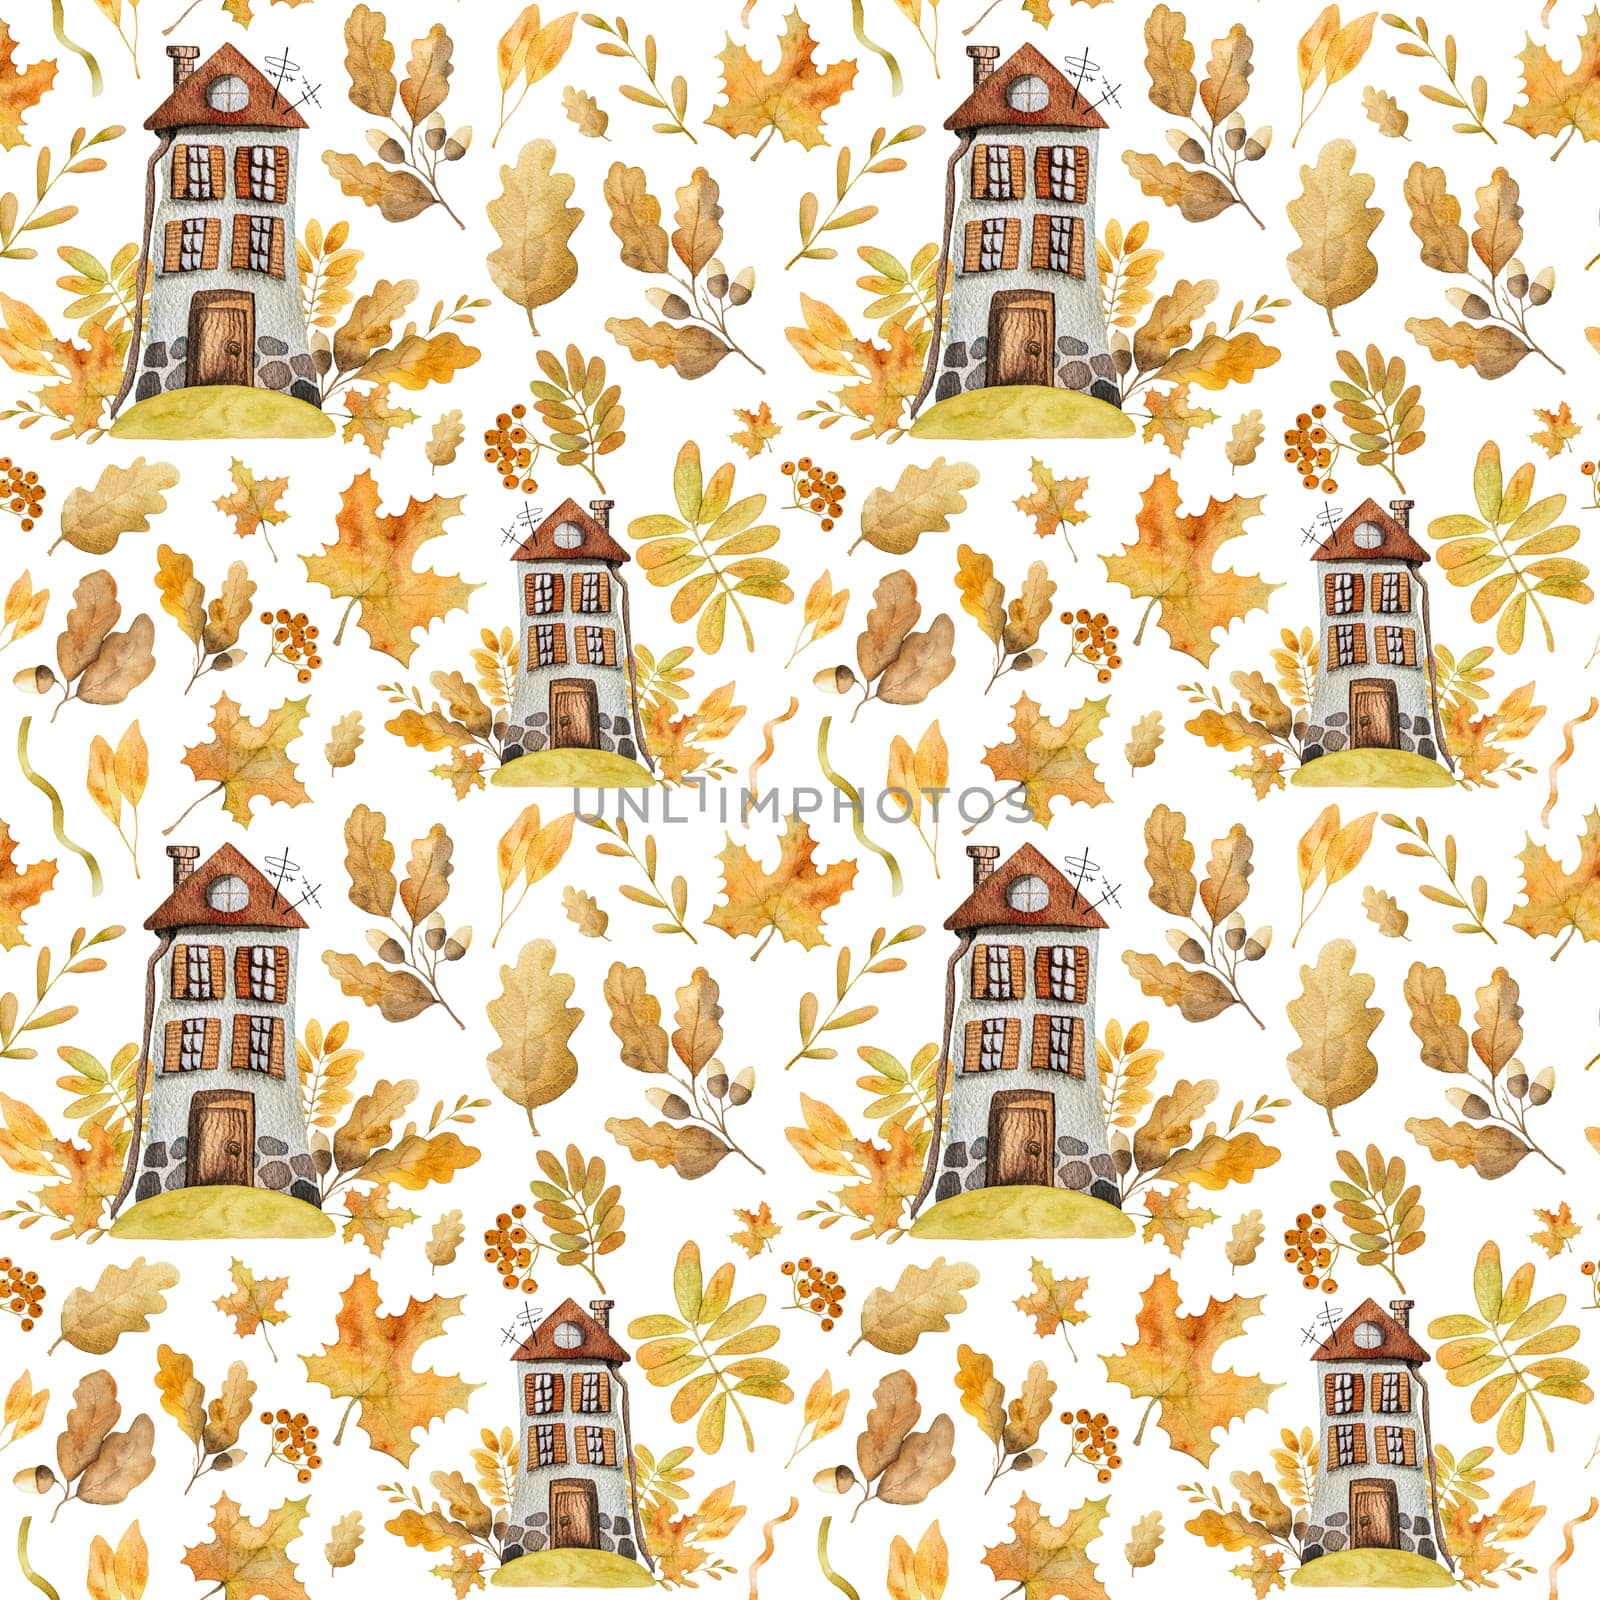 Adorable autumn houses with leaves and pumpkins by tan4ikk1